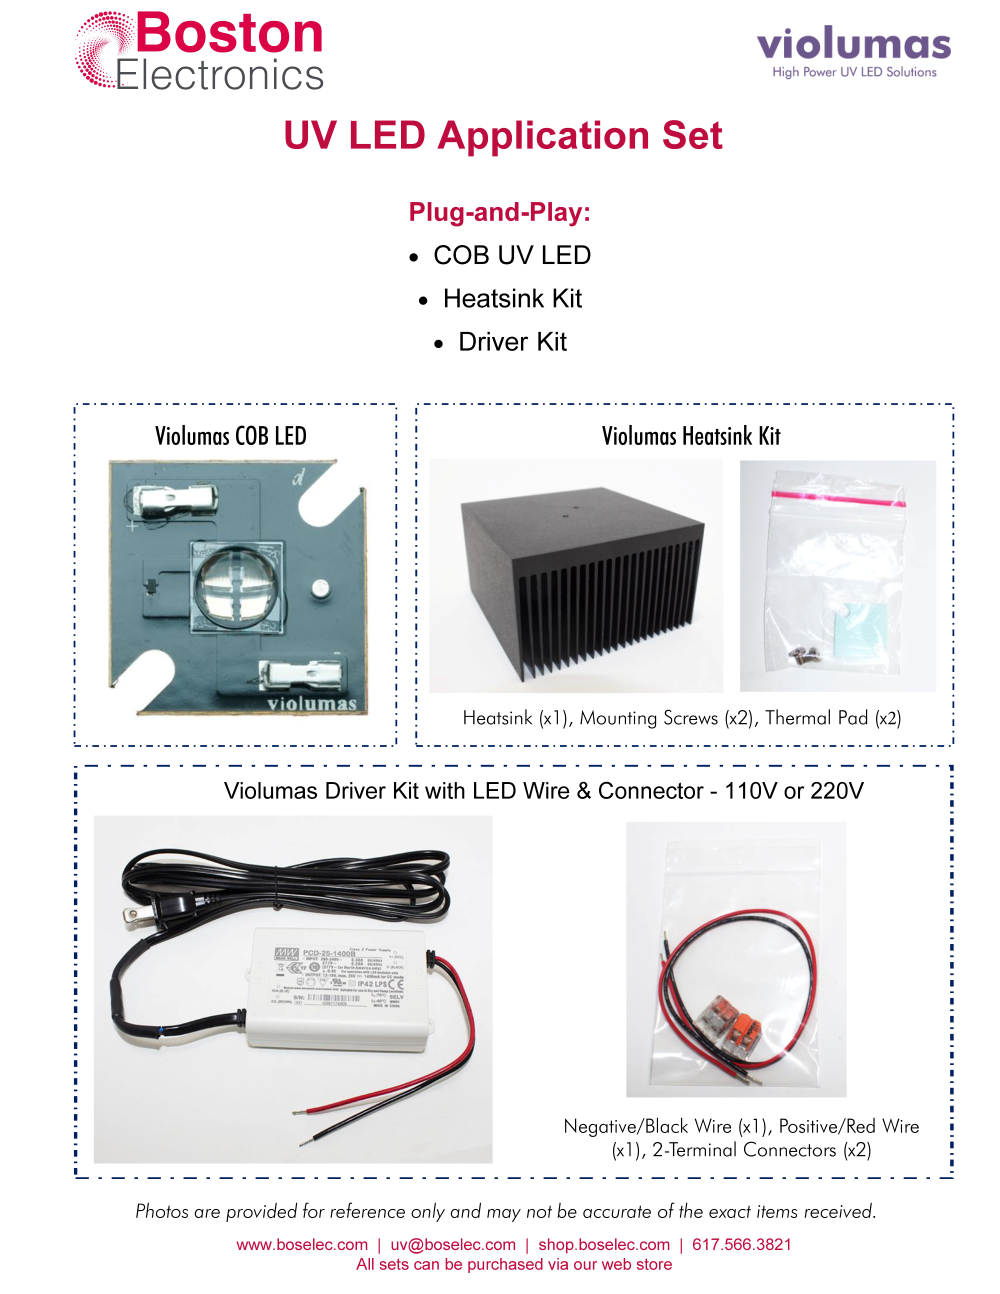 310nm UV LED Application Set- High Power LED, Heat Sink, and Driver